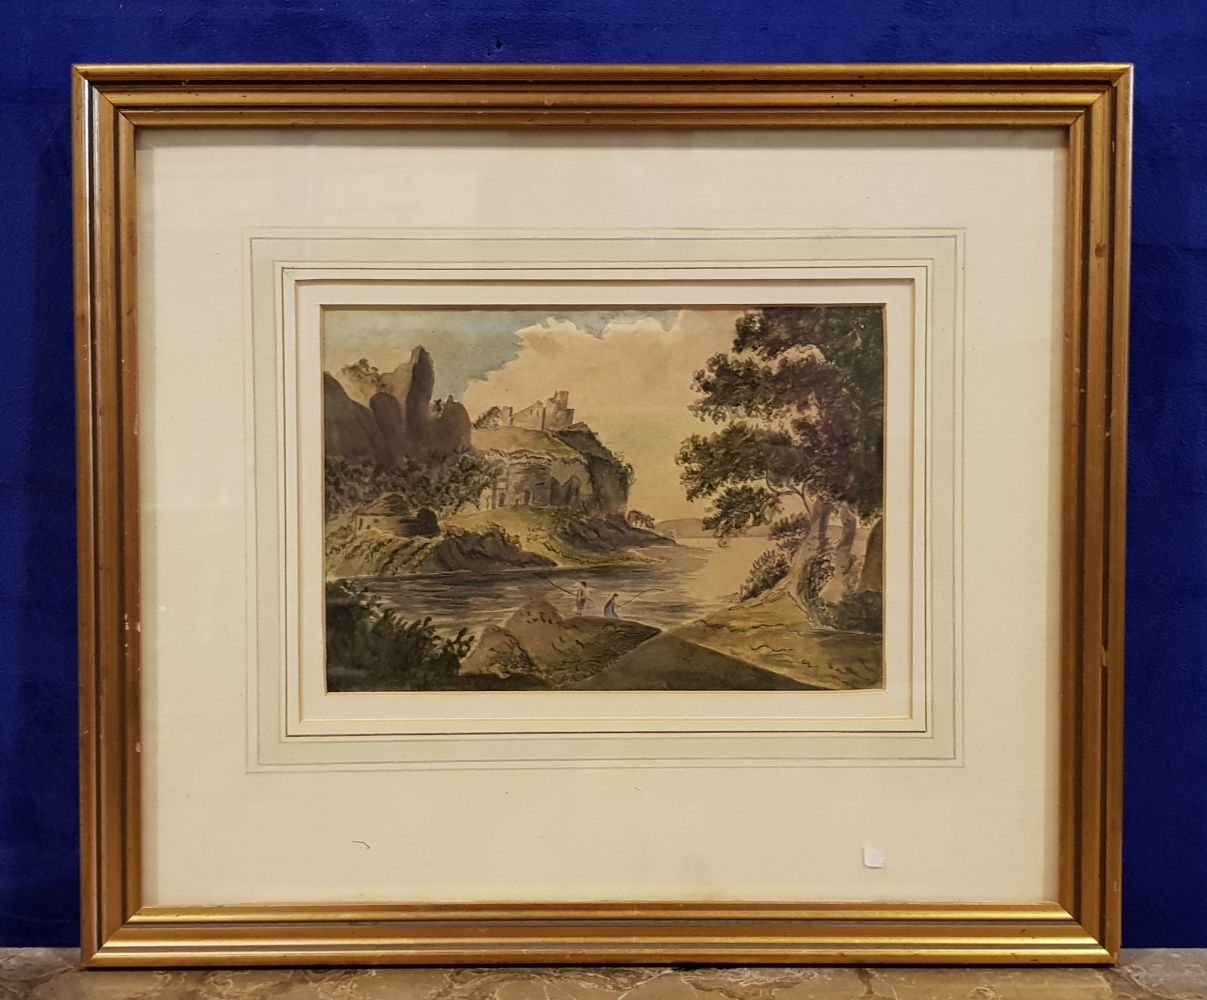 ATTRIB. TO SOPHIA BRISCOE, “SUMMER HILL, FIGURES FISHING IN A LANDSCAPE”, watercolour on paper, ‘ - Image 2 of 3